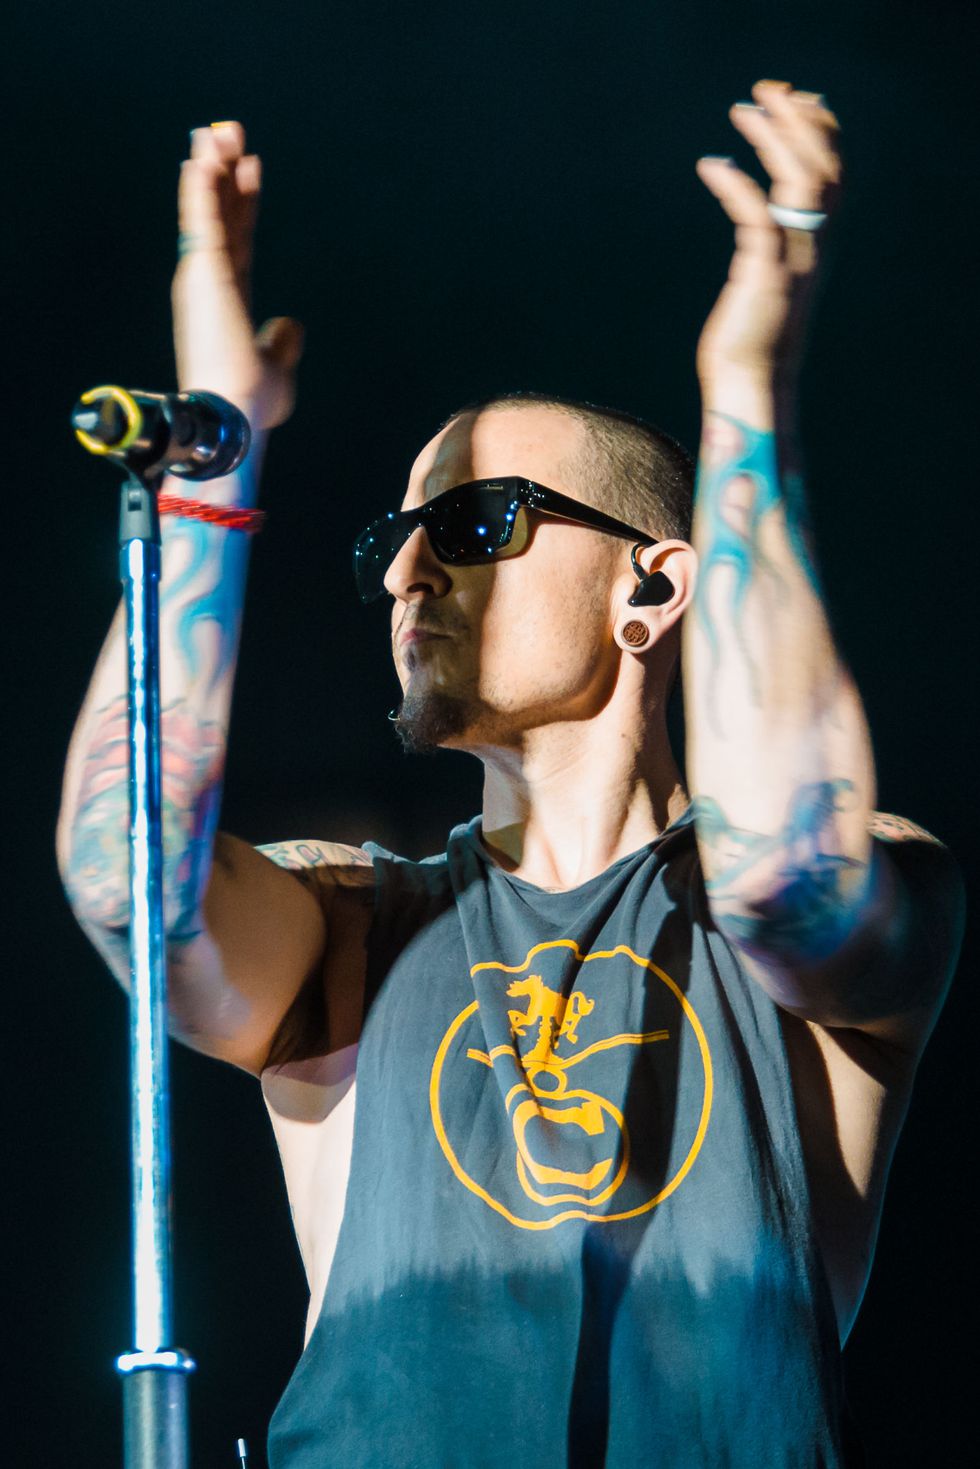 SAO PAULO, BRAZIL - MAY 13: Chester Bennington singer member of the band Linkin Park performs live on stage at Autodromo de Interlagos on May 13, 2017 in Sao Paulo, Brazil.(Photo by Mauricio Santana/Getty Images)